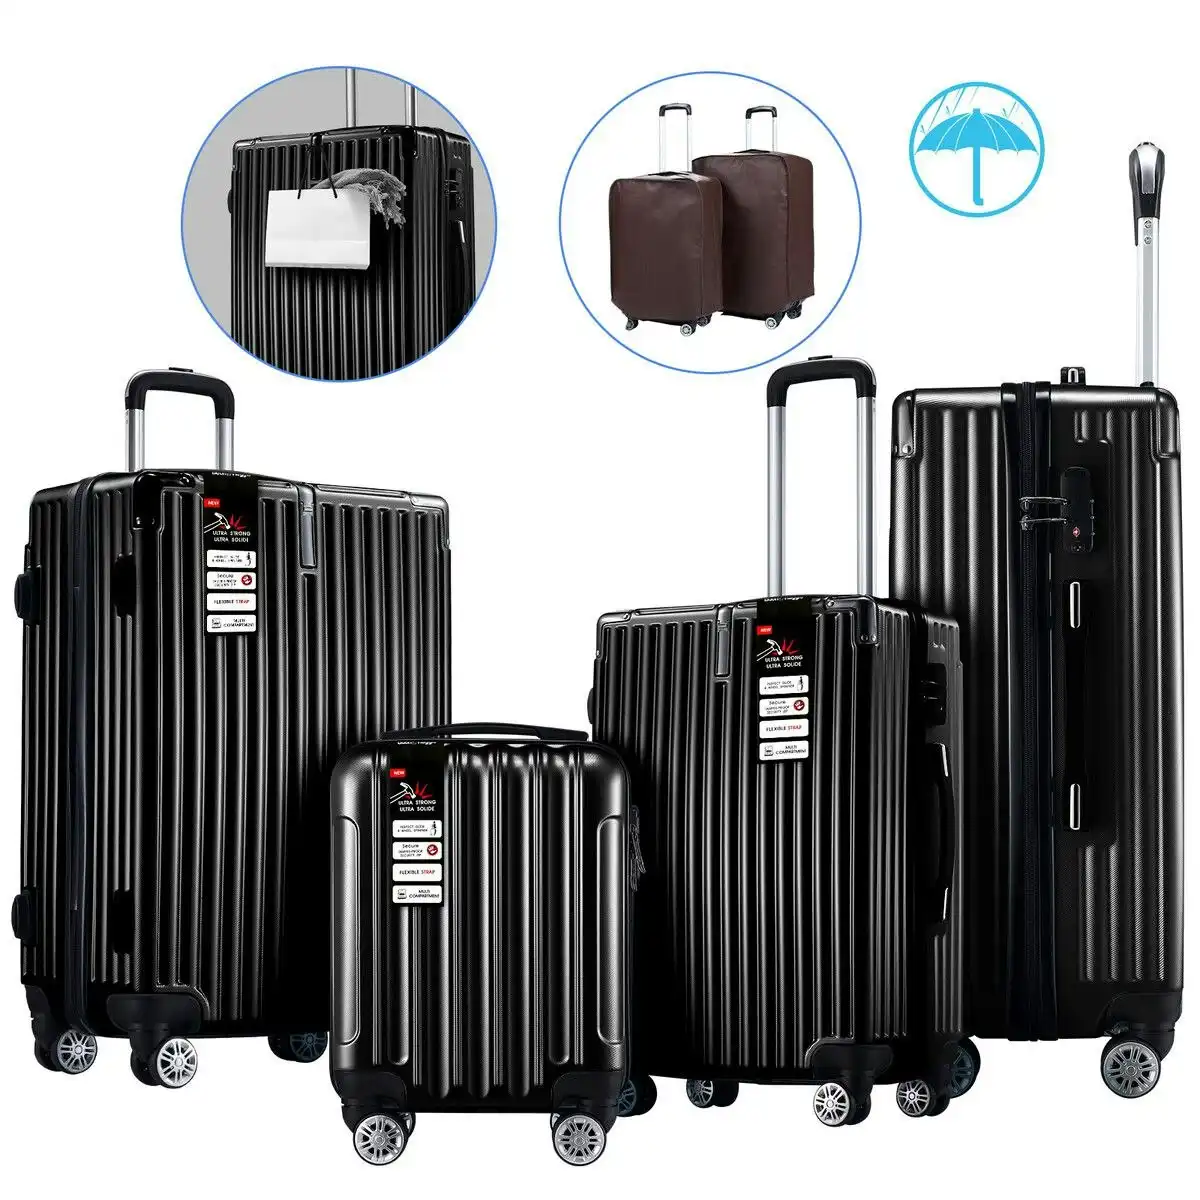 Buon Viaggio 4 Piece Luggage Set Carry On Traveller Suitcases Hard Shell Rolling Trolley Checked Bag TSA Lock Front Hook Lightweight Black